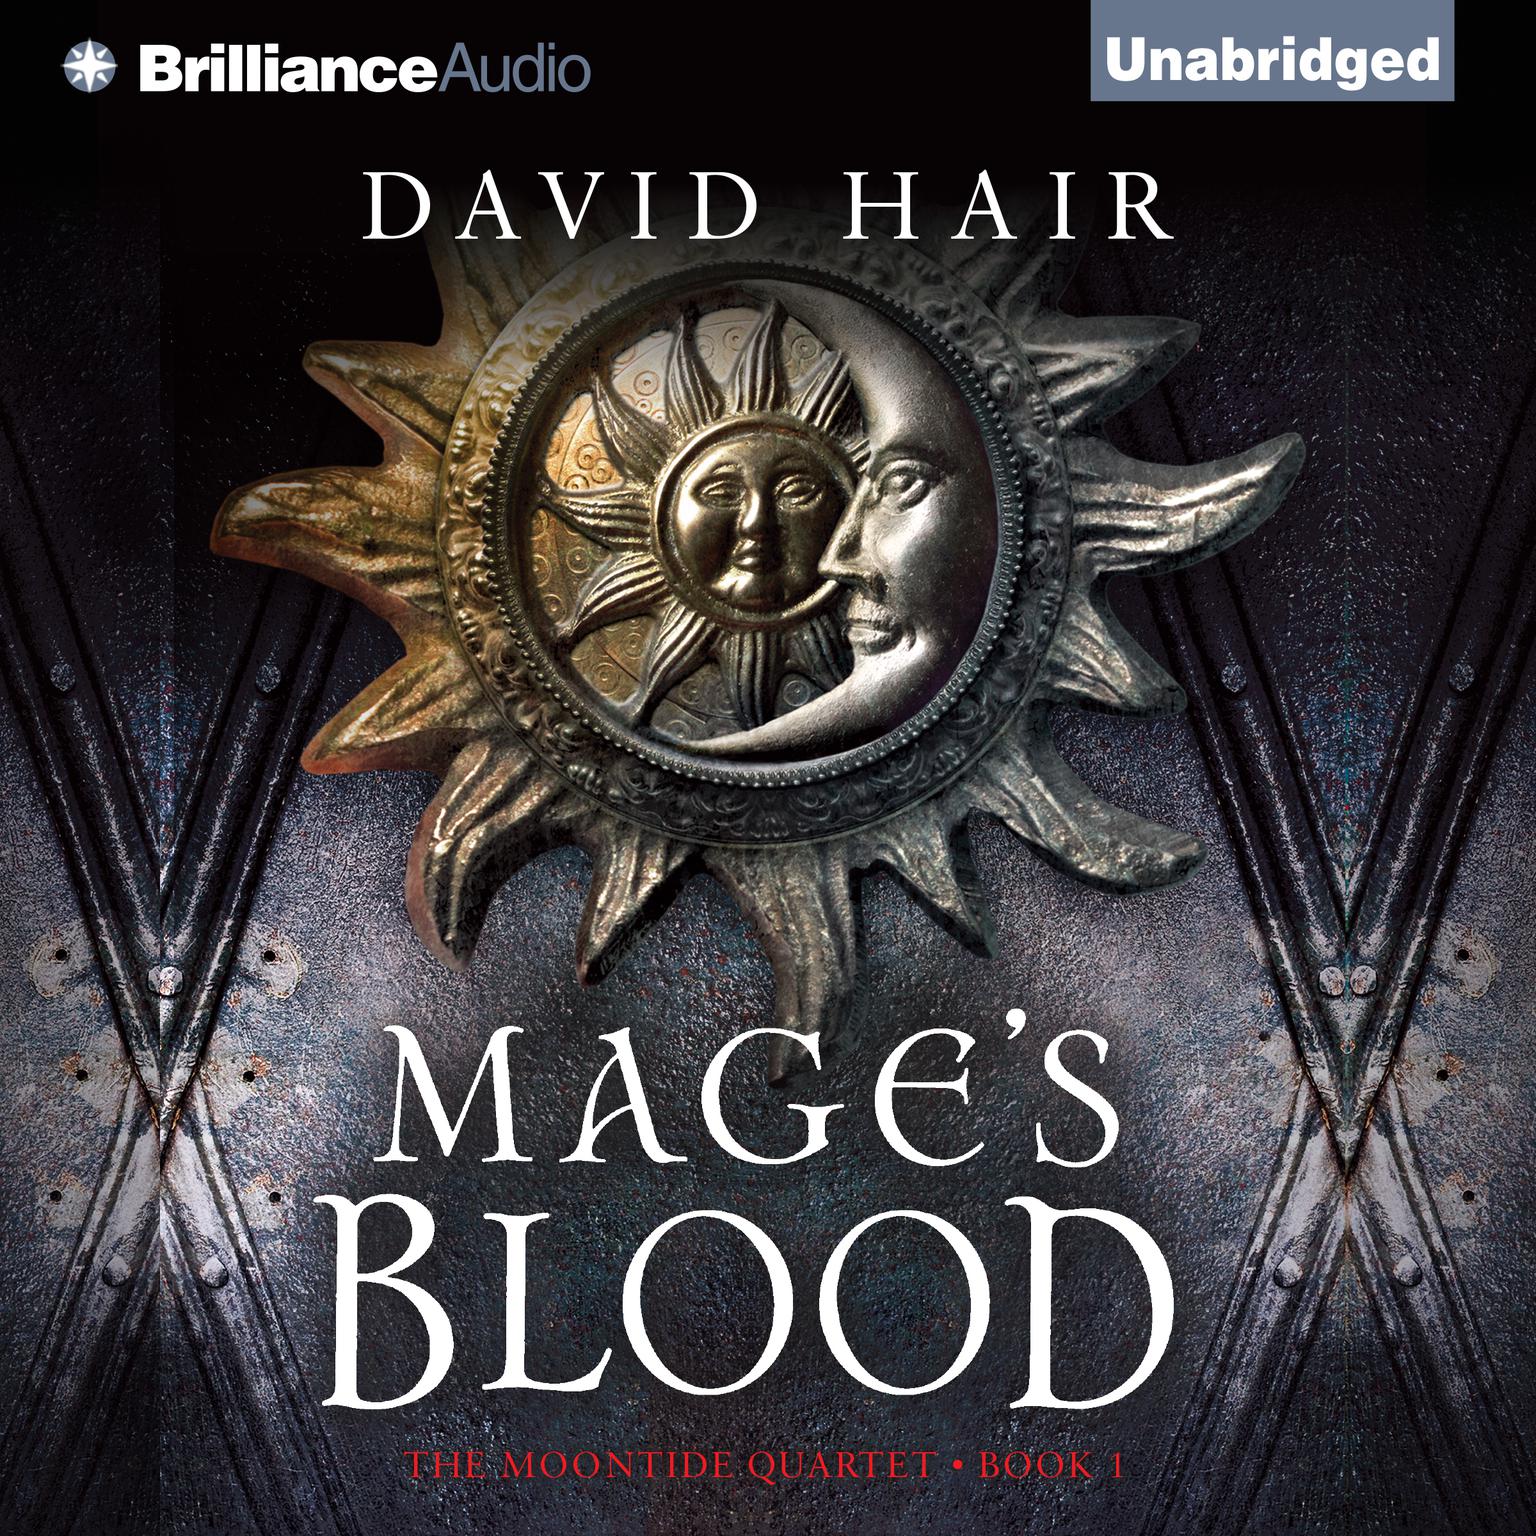 Mages Blood Audiobook, by David Hair